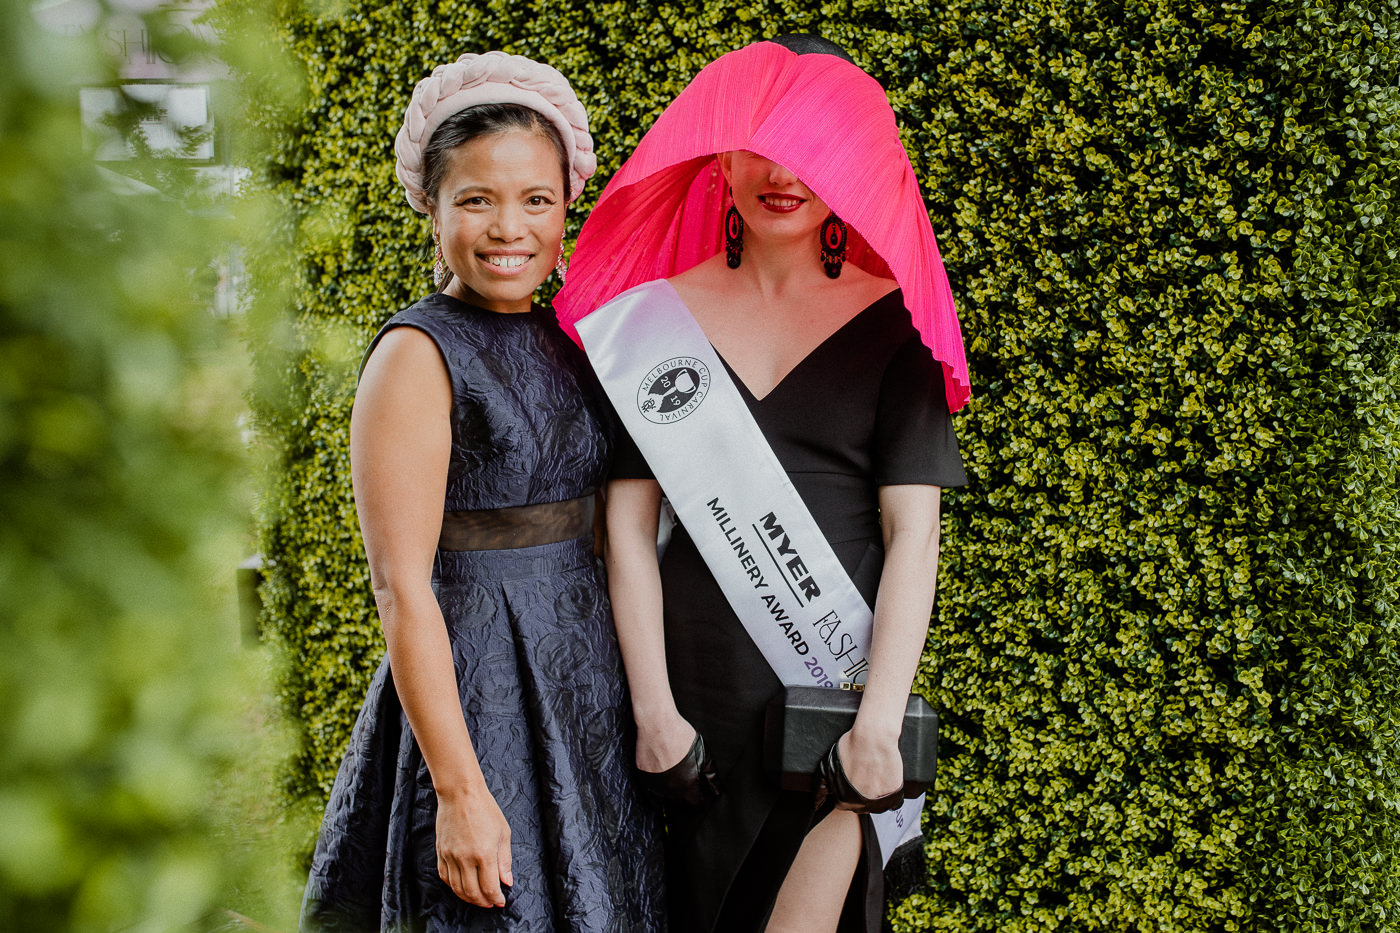 Millinery Award on Oaks Day - Myer Fashions on the Filed - 2nd Runner Up Designer Souri Sengdara and Model Jessica with winning millinery